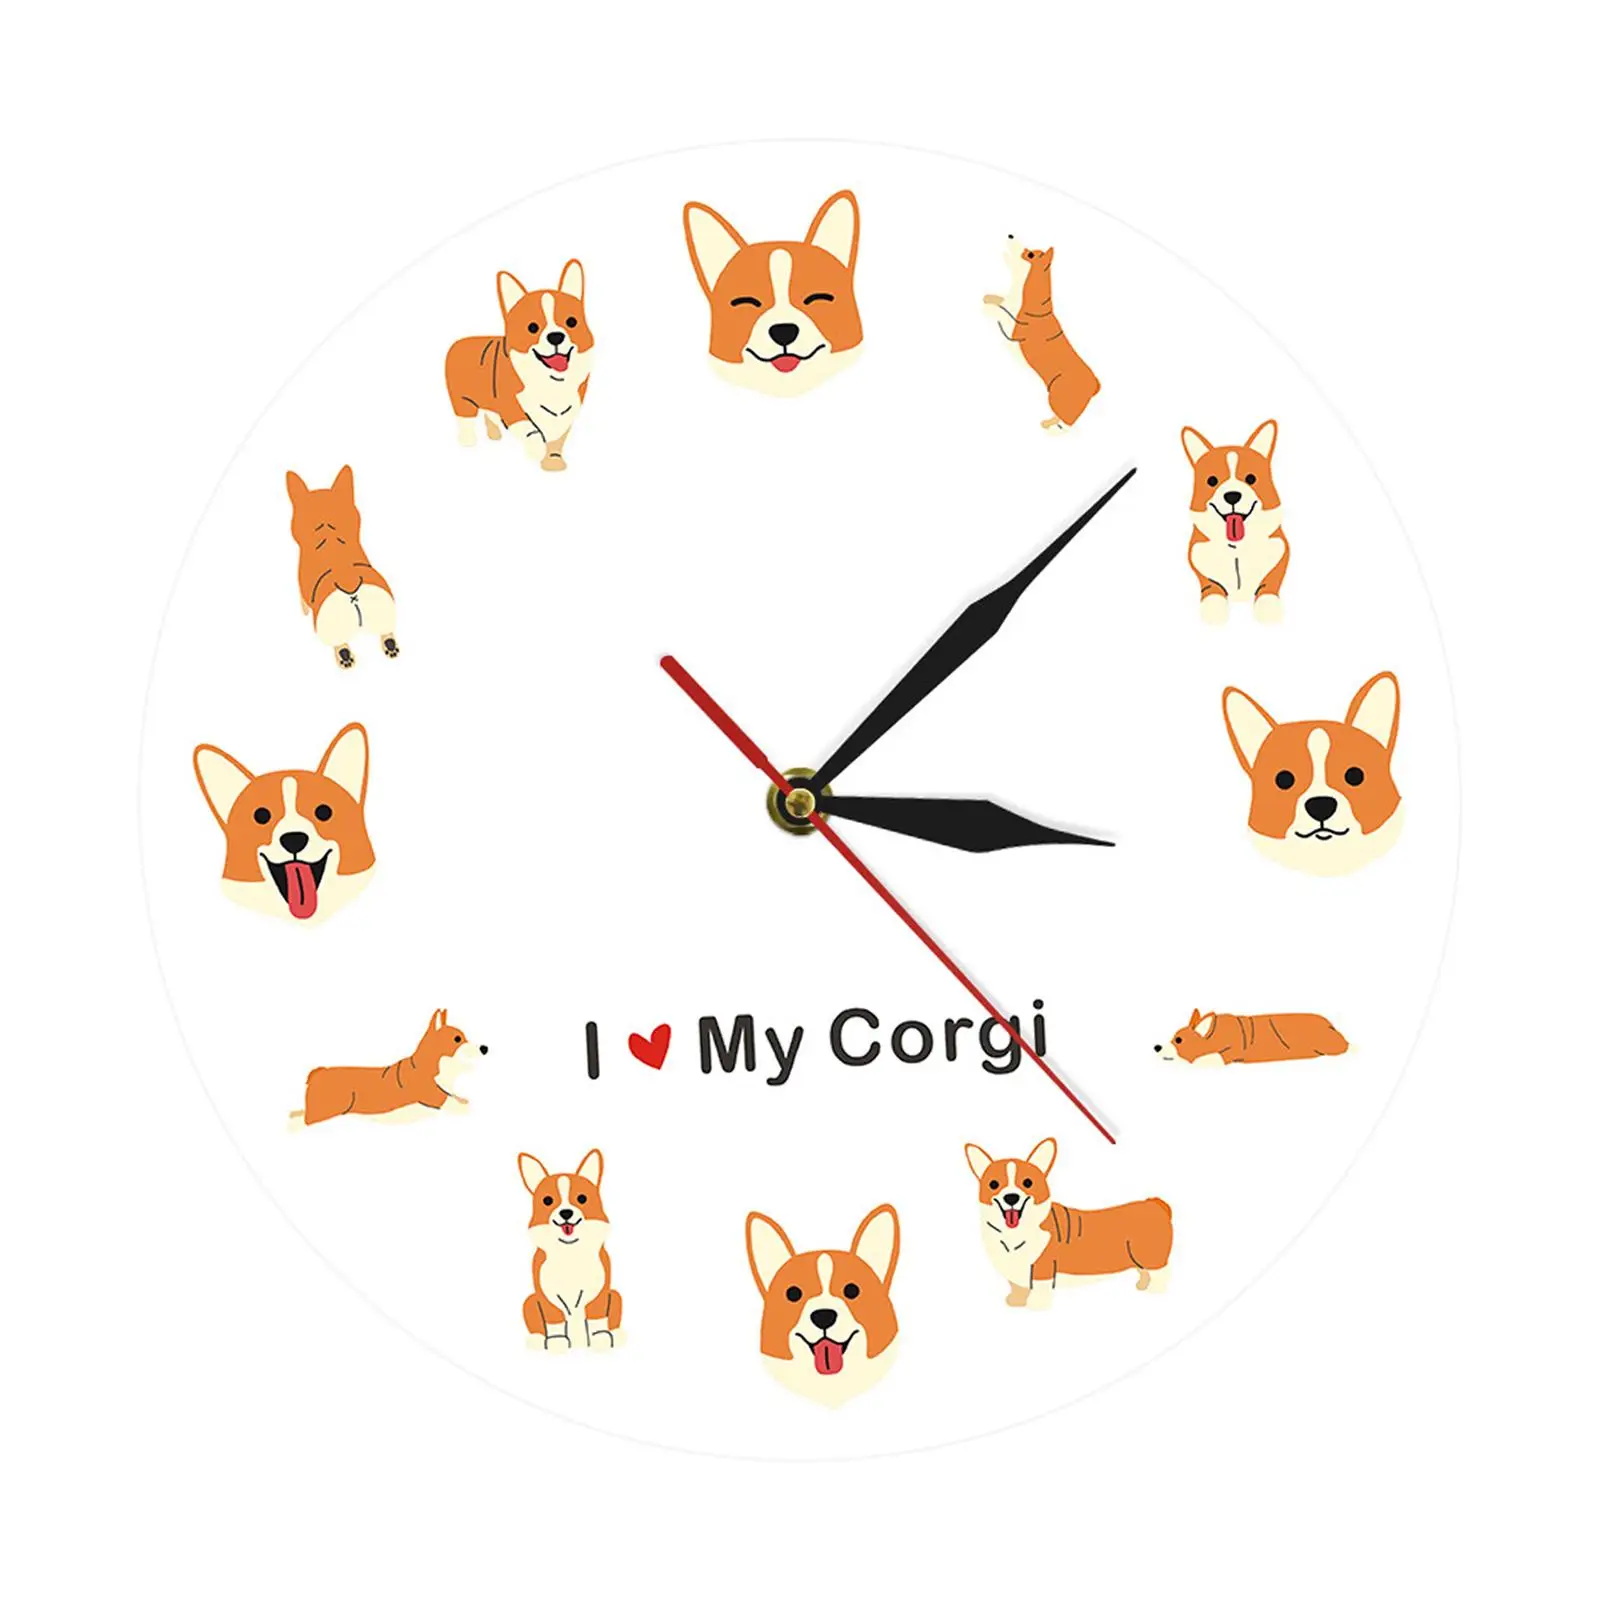 Wall Clock Art Decor Decoration Dogs Theme Hanging for Bathroom Kitchen